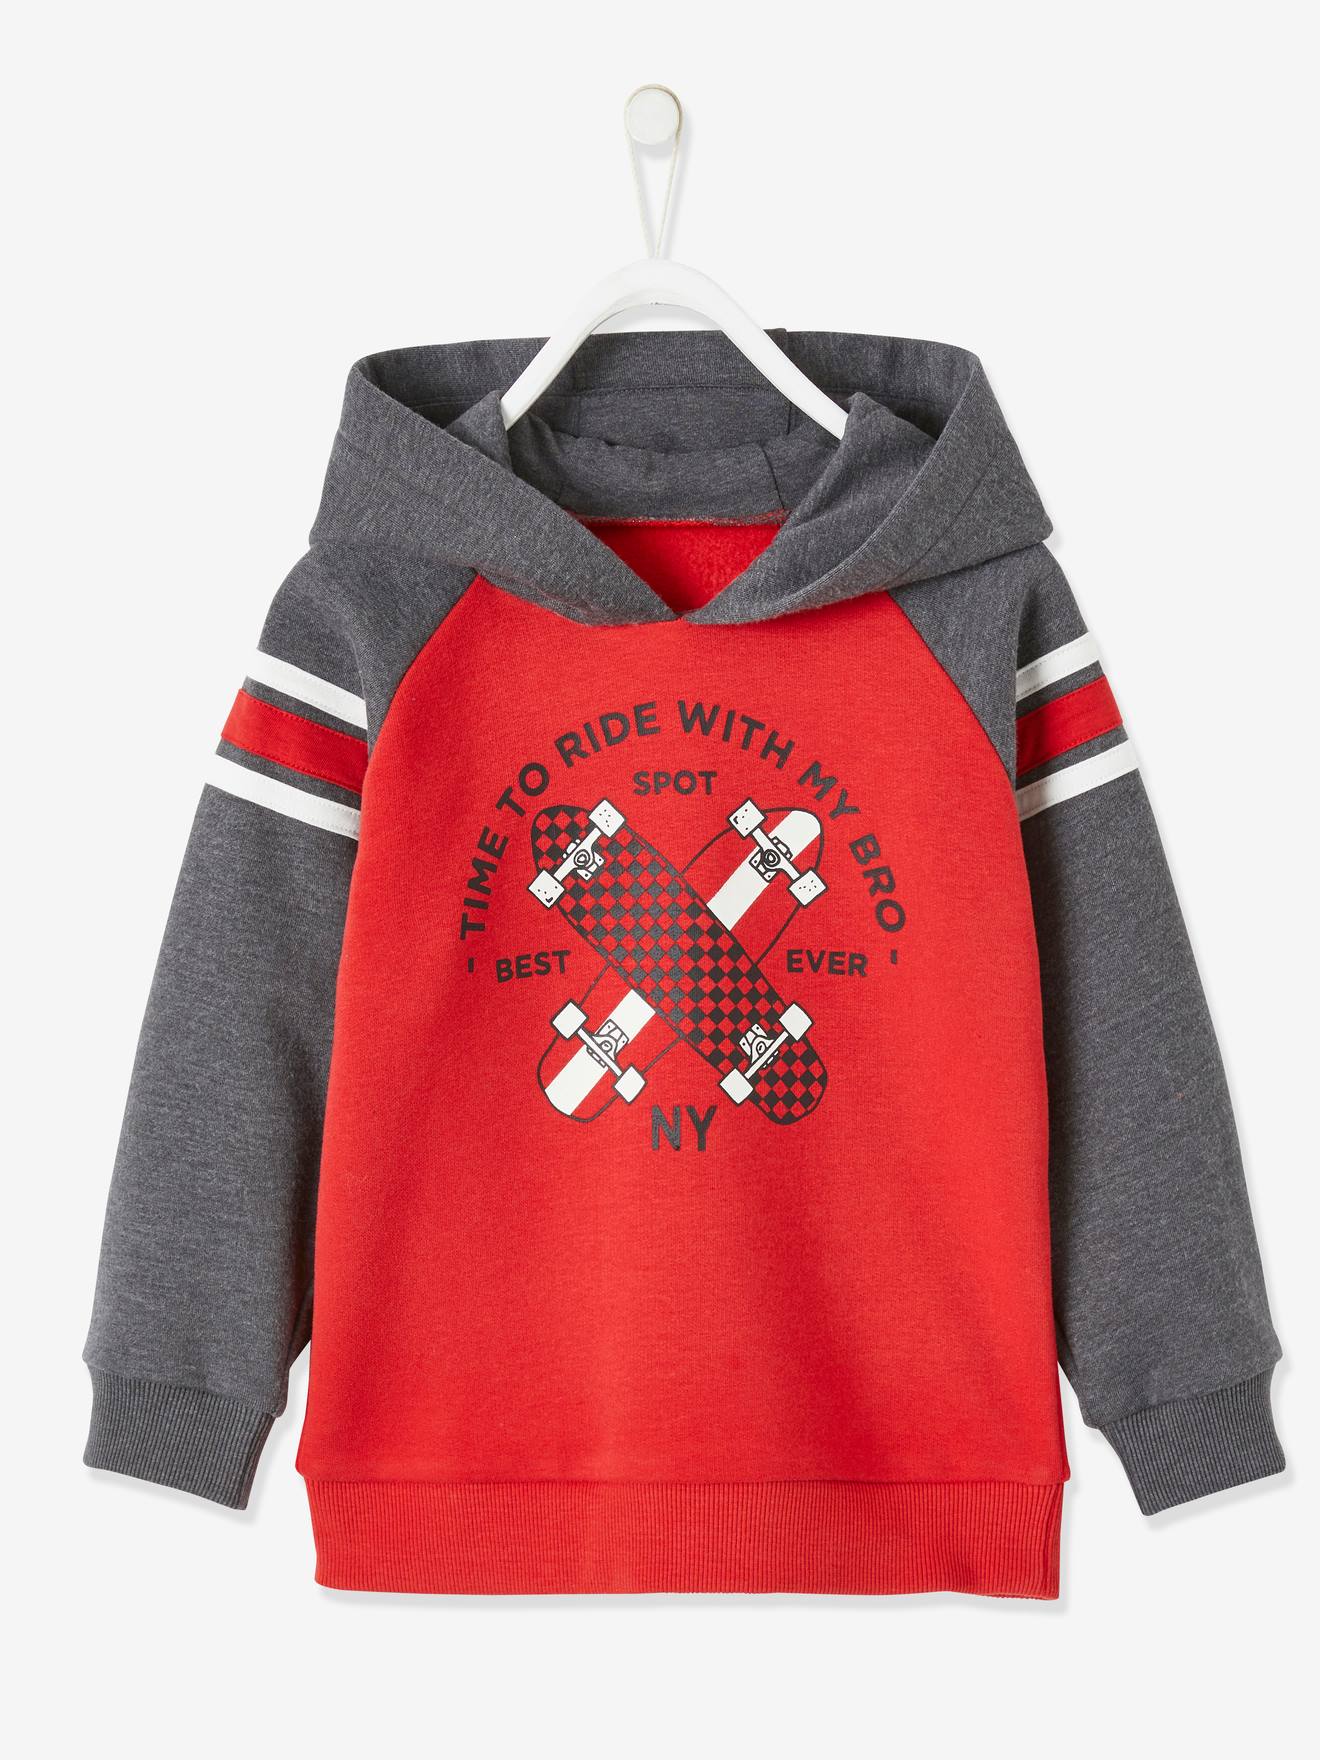 Aanpassing Negen tuberculose Hooded Sweatshirt with Graphic Motif & Striped Sleeves, for Boys - red, Boys